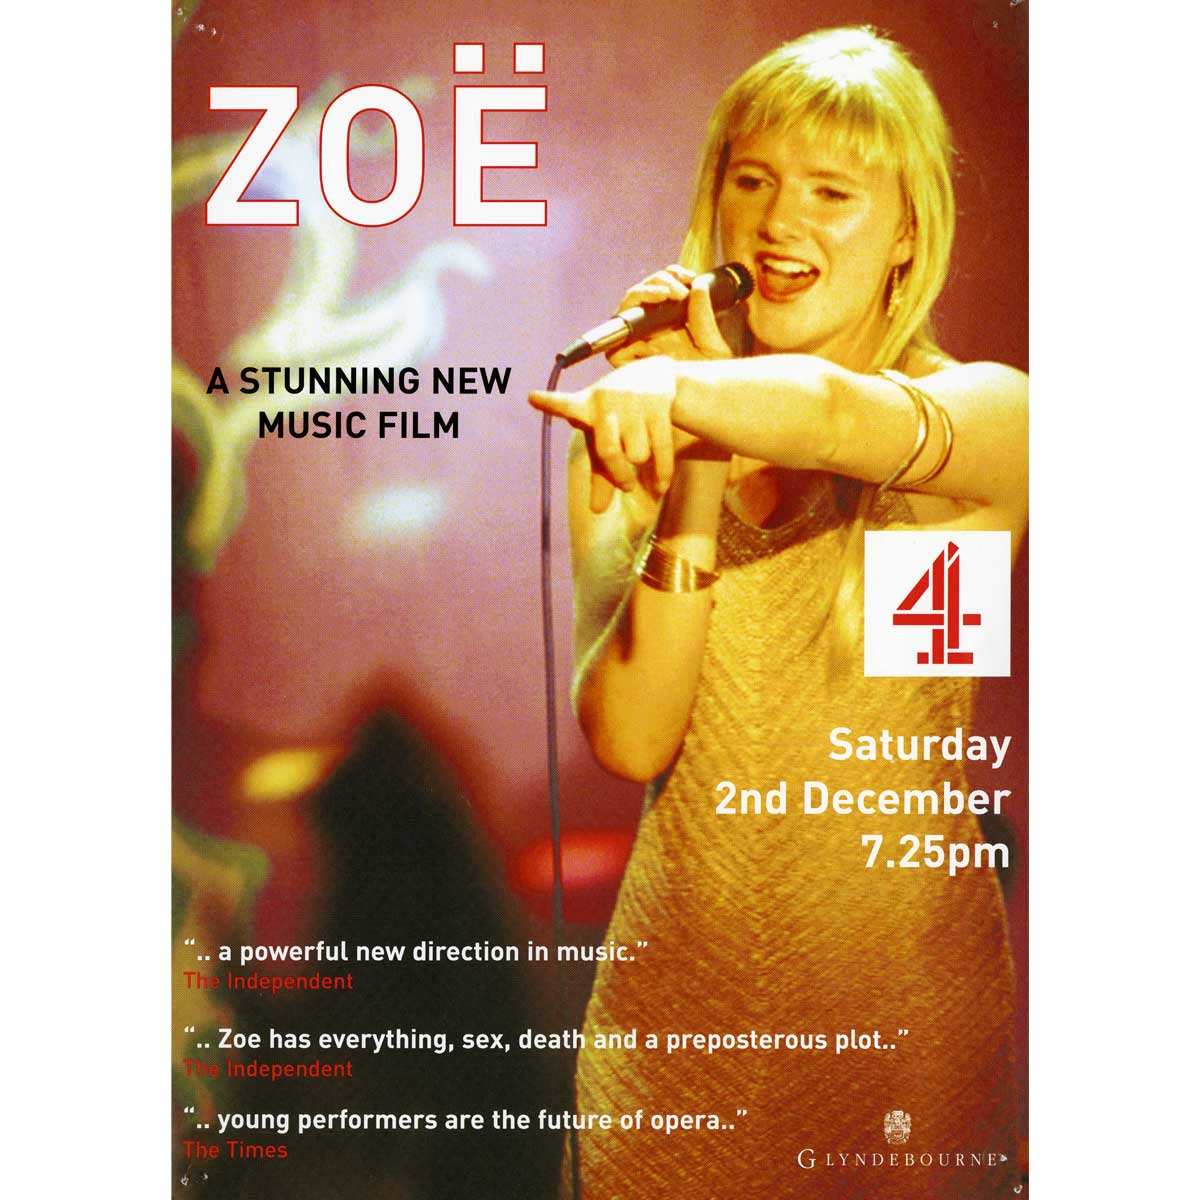 Glyndebourne Youth Opera 'Zoe' 2000 Photographic Poster